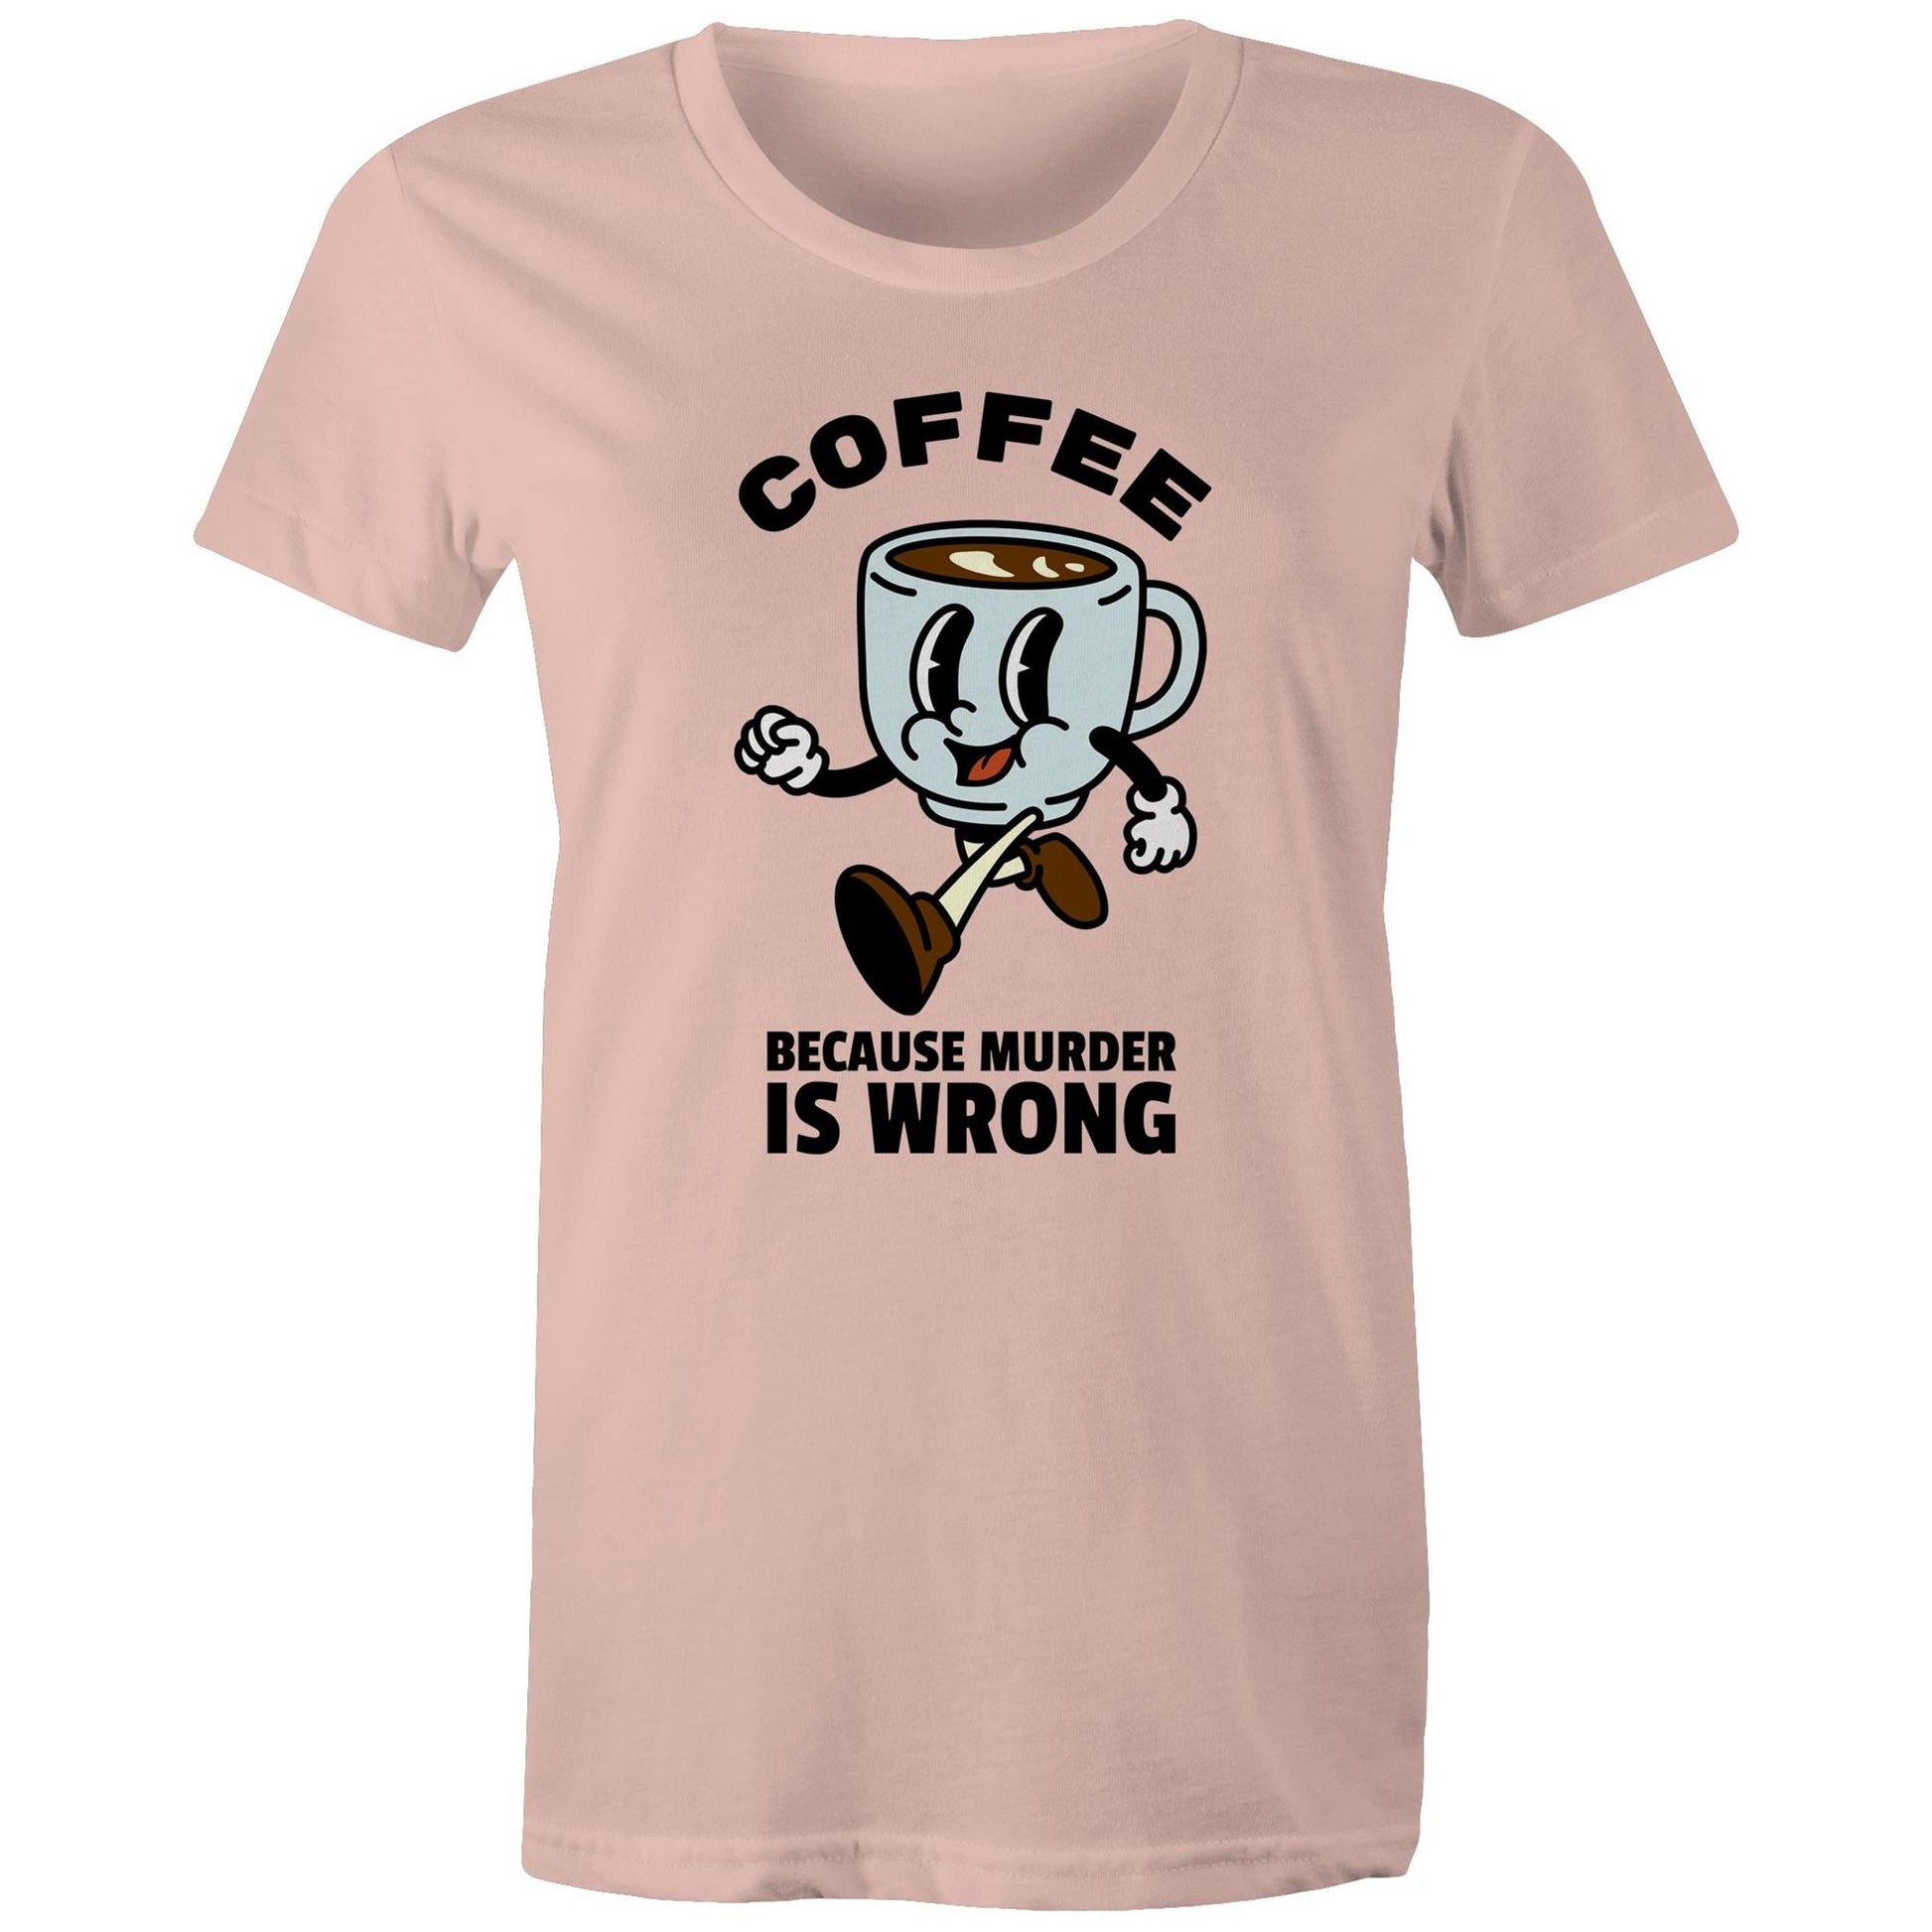 Coffee, Because Murder Is Wrong - Womens T-shirt Pale Pink Womens T-shirt Coffee